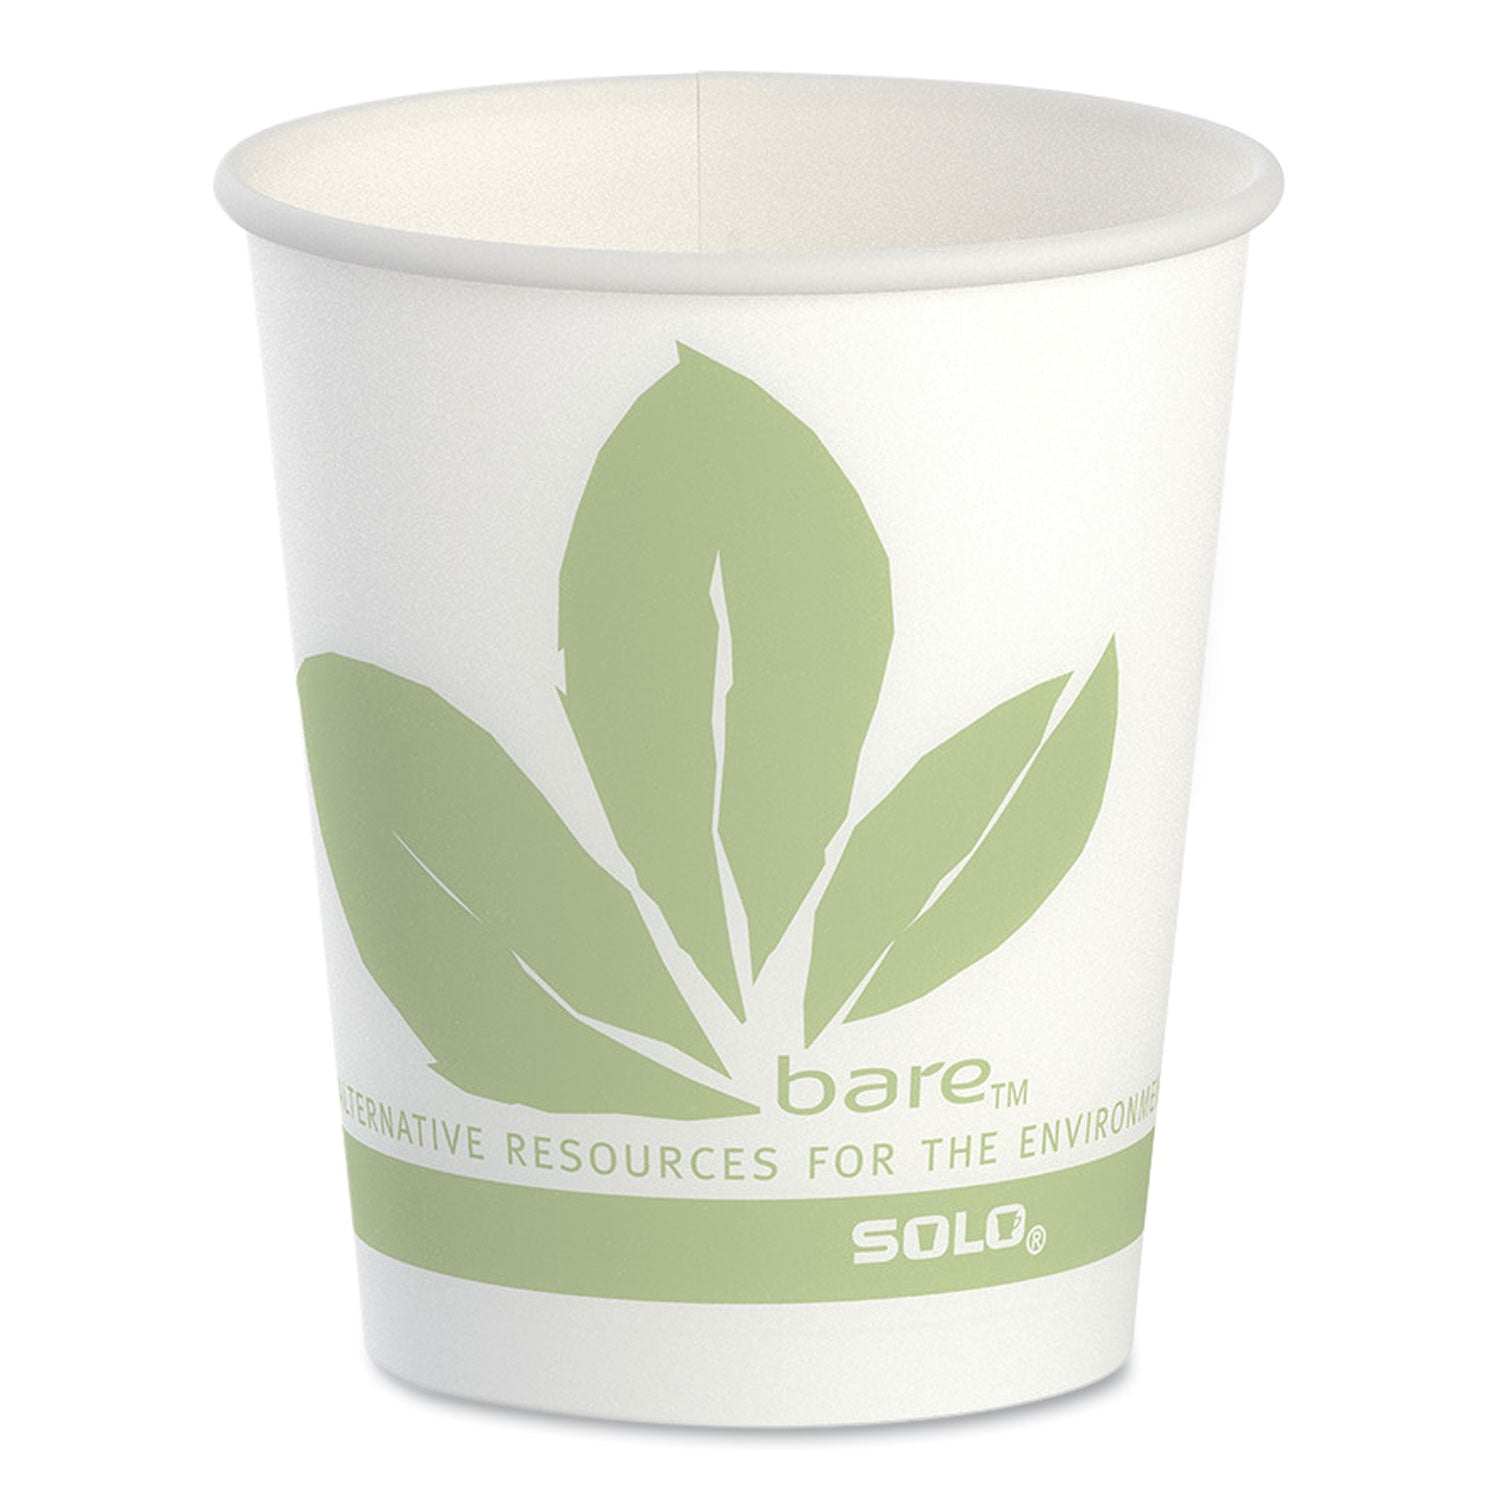 bare-eco-forward-paper-cold-cups-proplanet-seal-5-oz-green-white-100-sleeve-30-sleeves-carton_sccr53bbjd110ct - 1